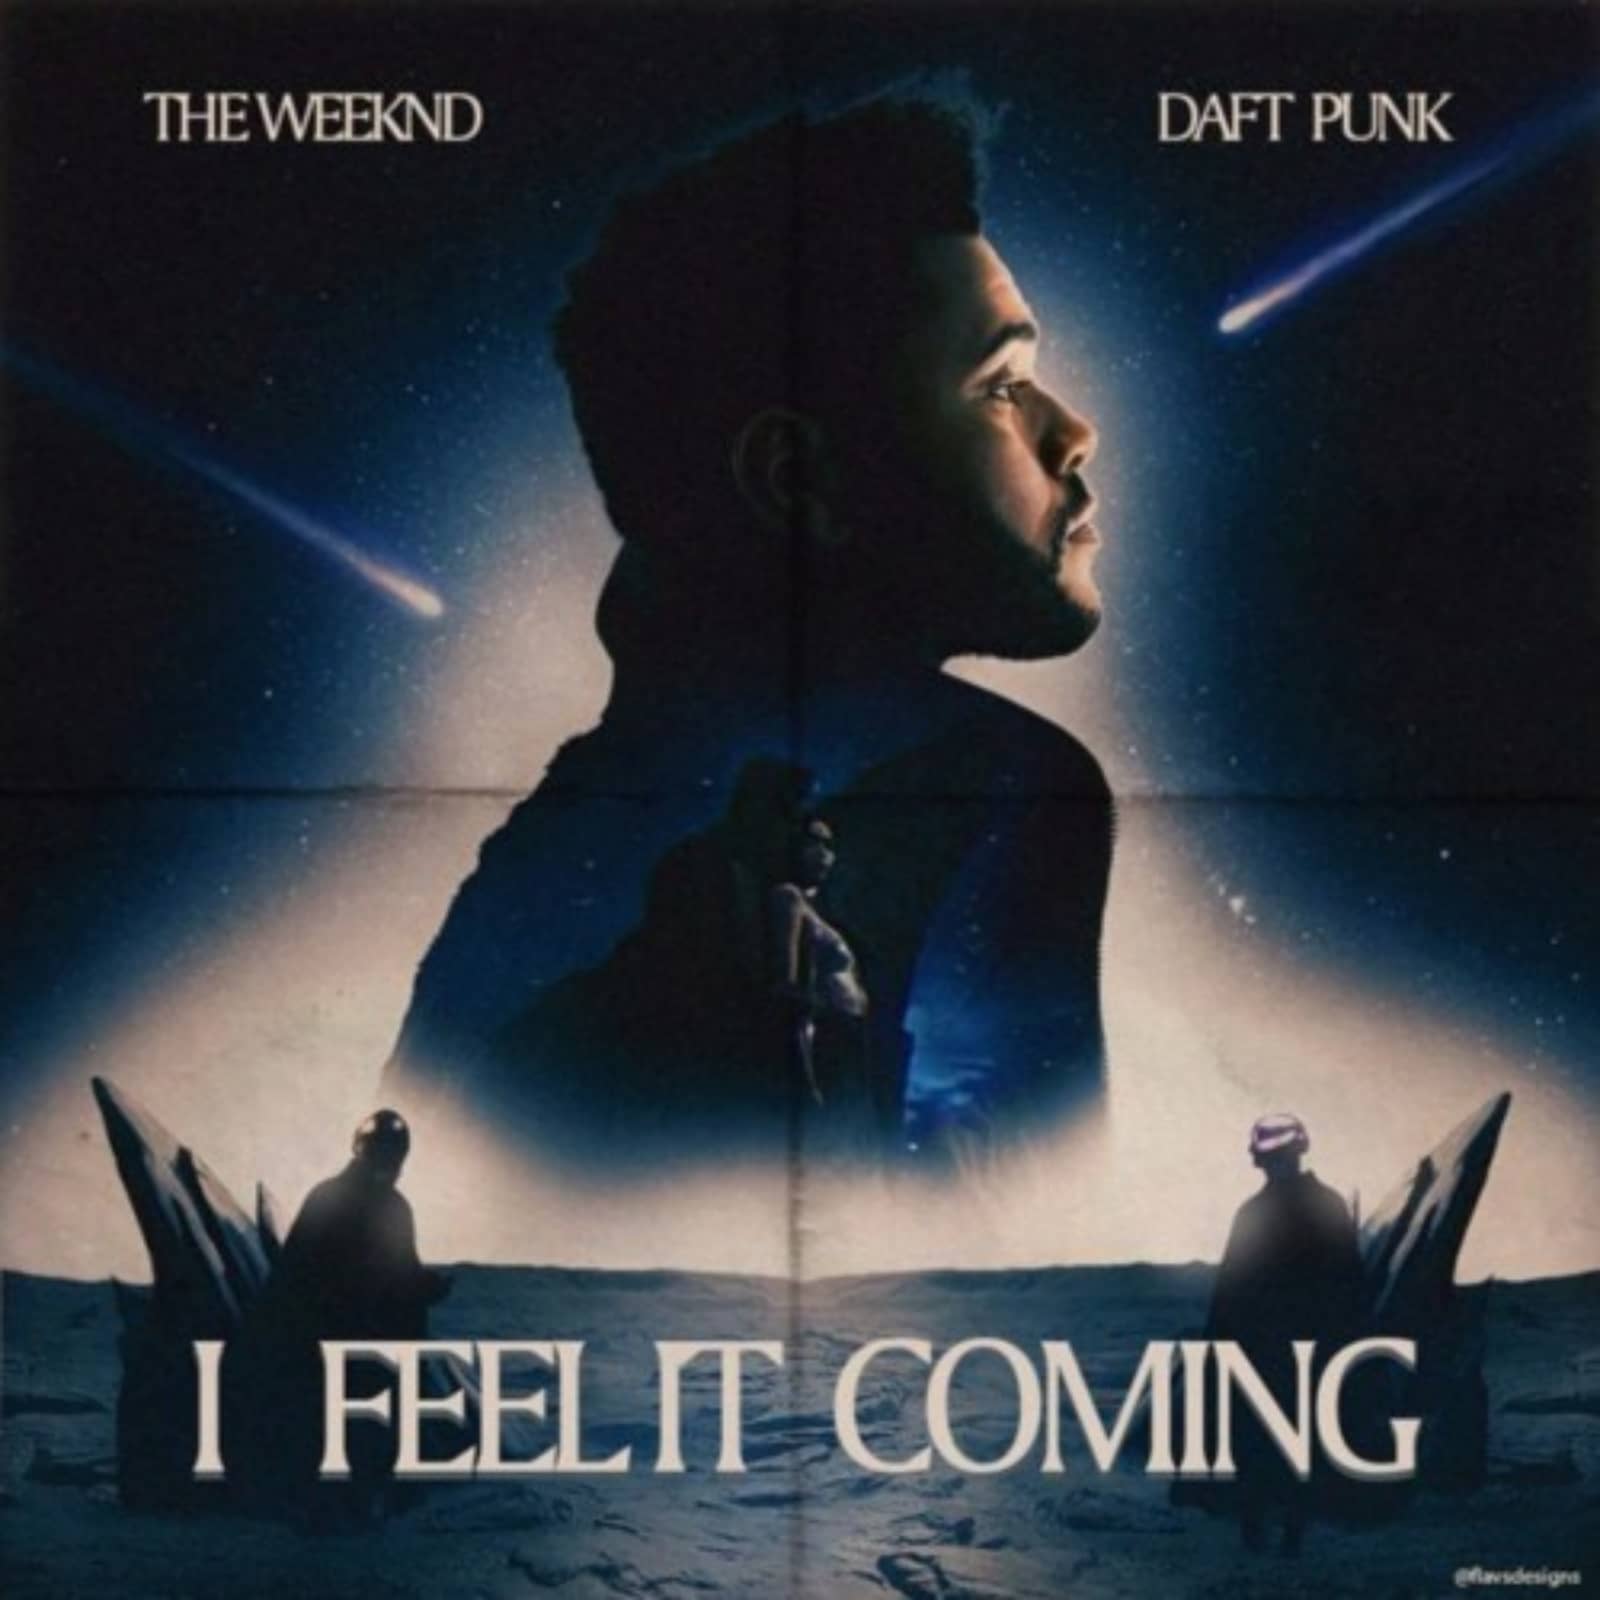 Im coming for it all. I feel it coming the Weeknd. The Weeknd Daft Punk i feel it coming. The weekend Daft Punk. Weeknd feel it coming.